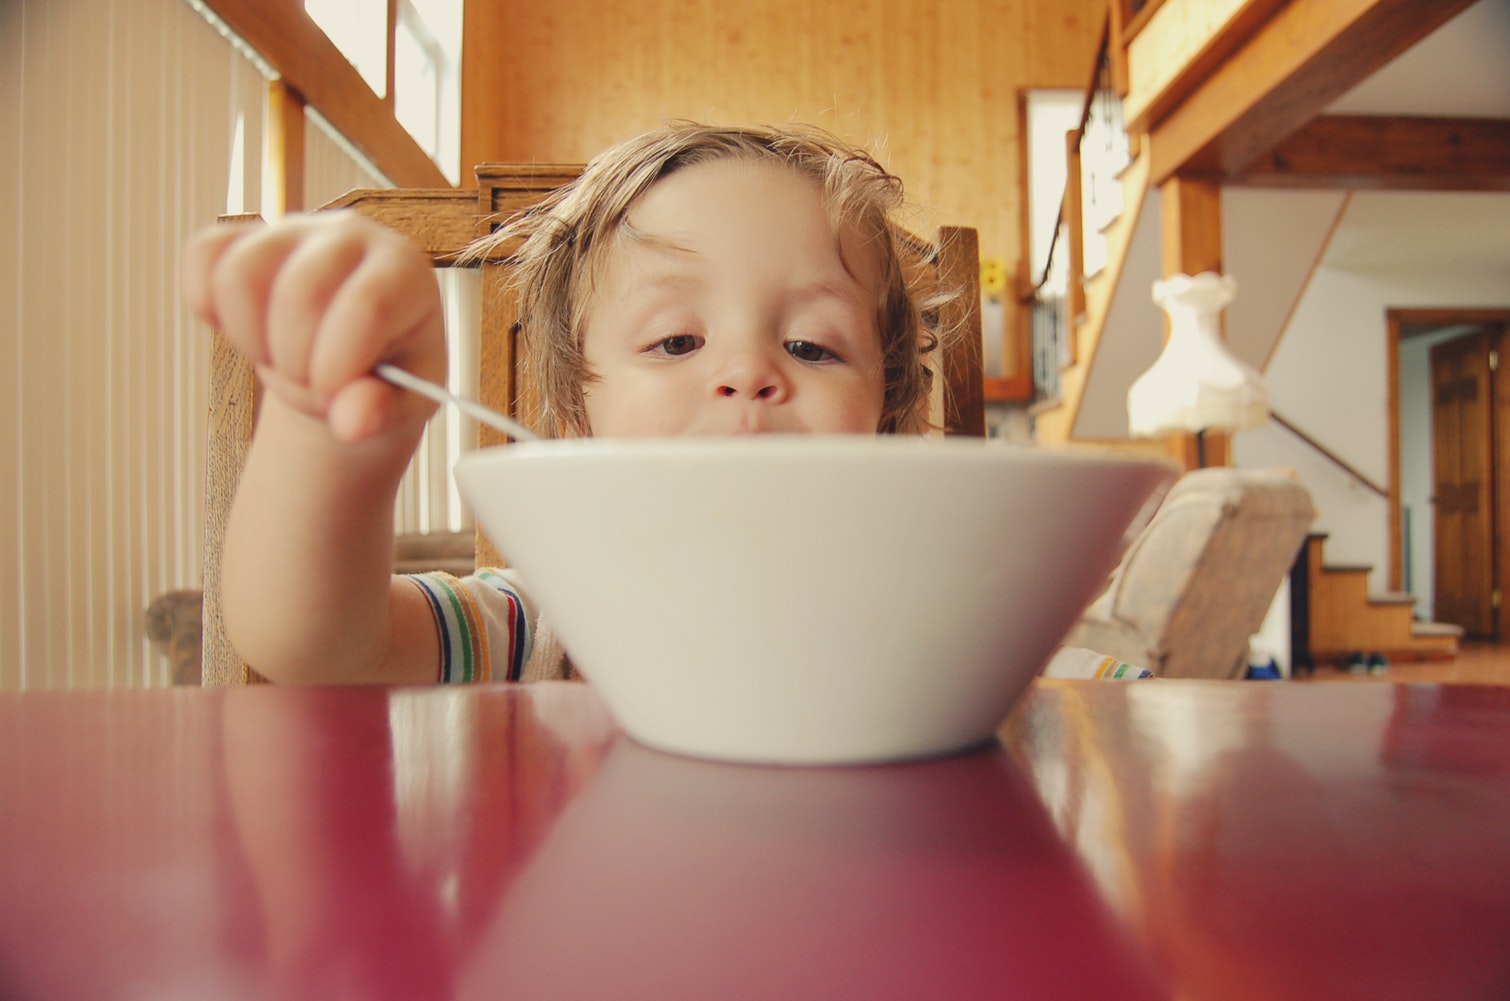 A child is holding a spoon and peering excitedly into a bowl